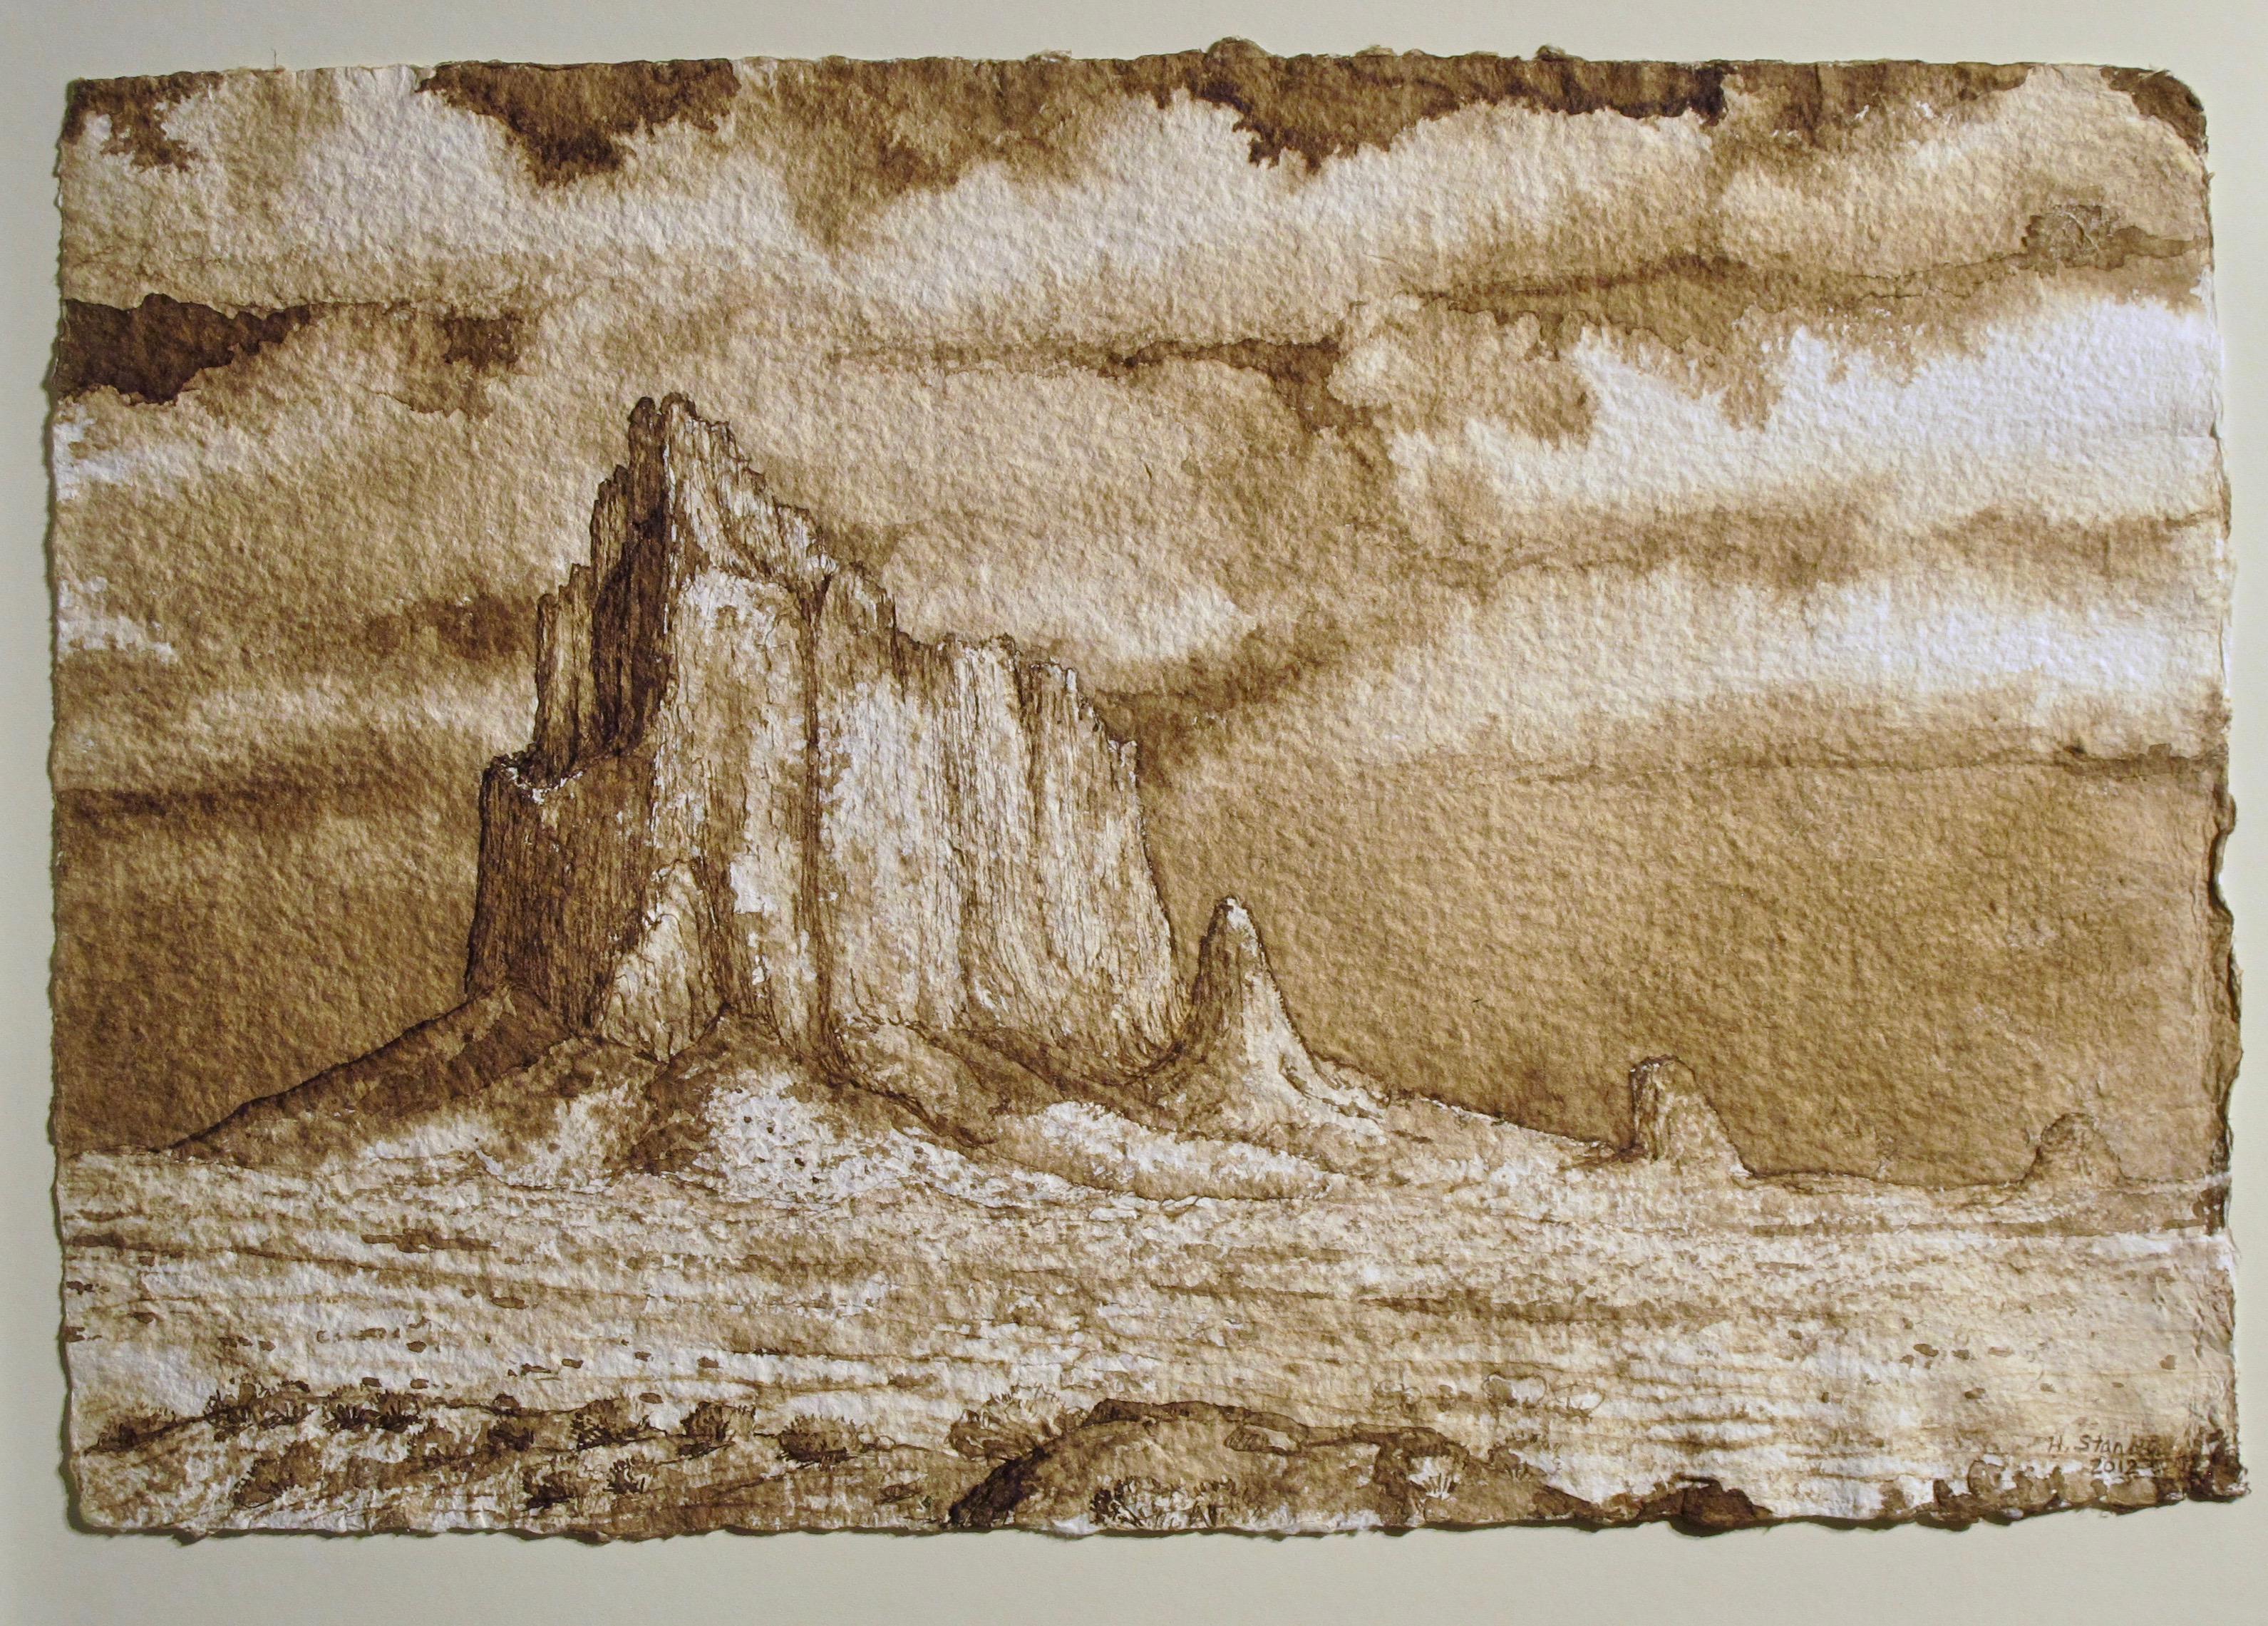 Another Set of Monuments, walnut ink painting on paper, desert landscape, brown